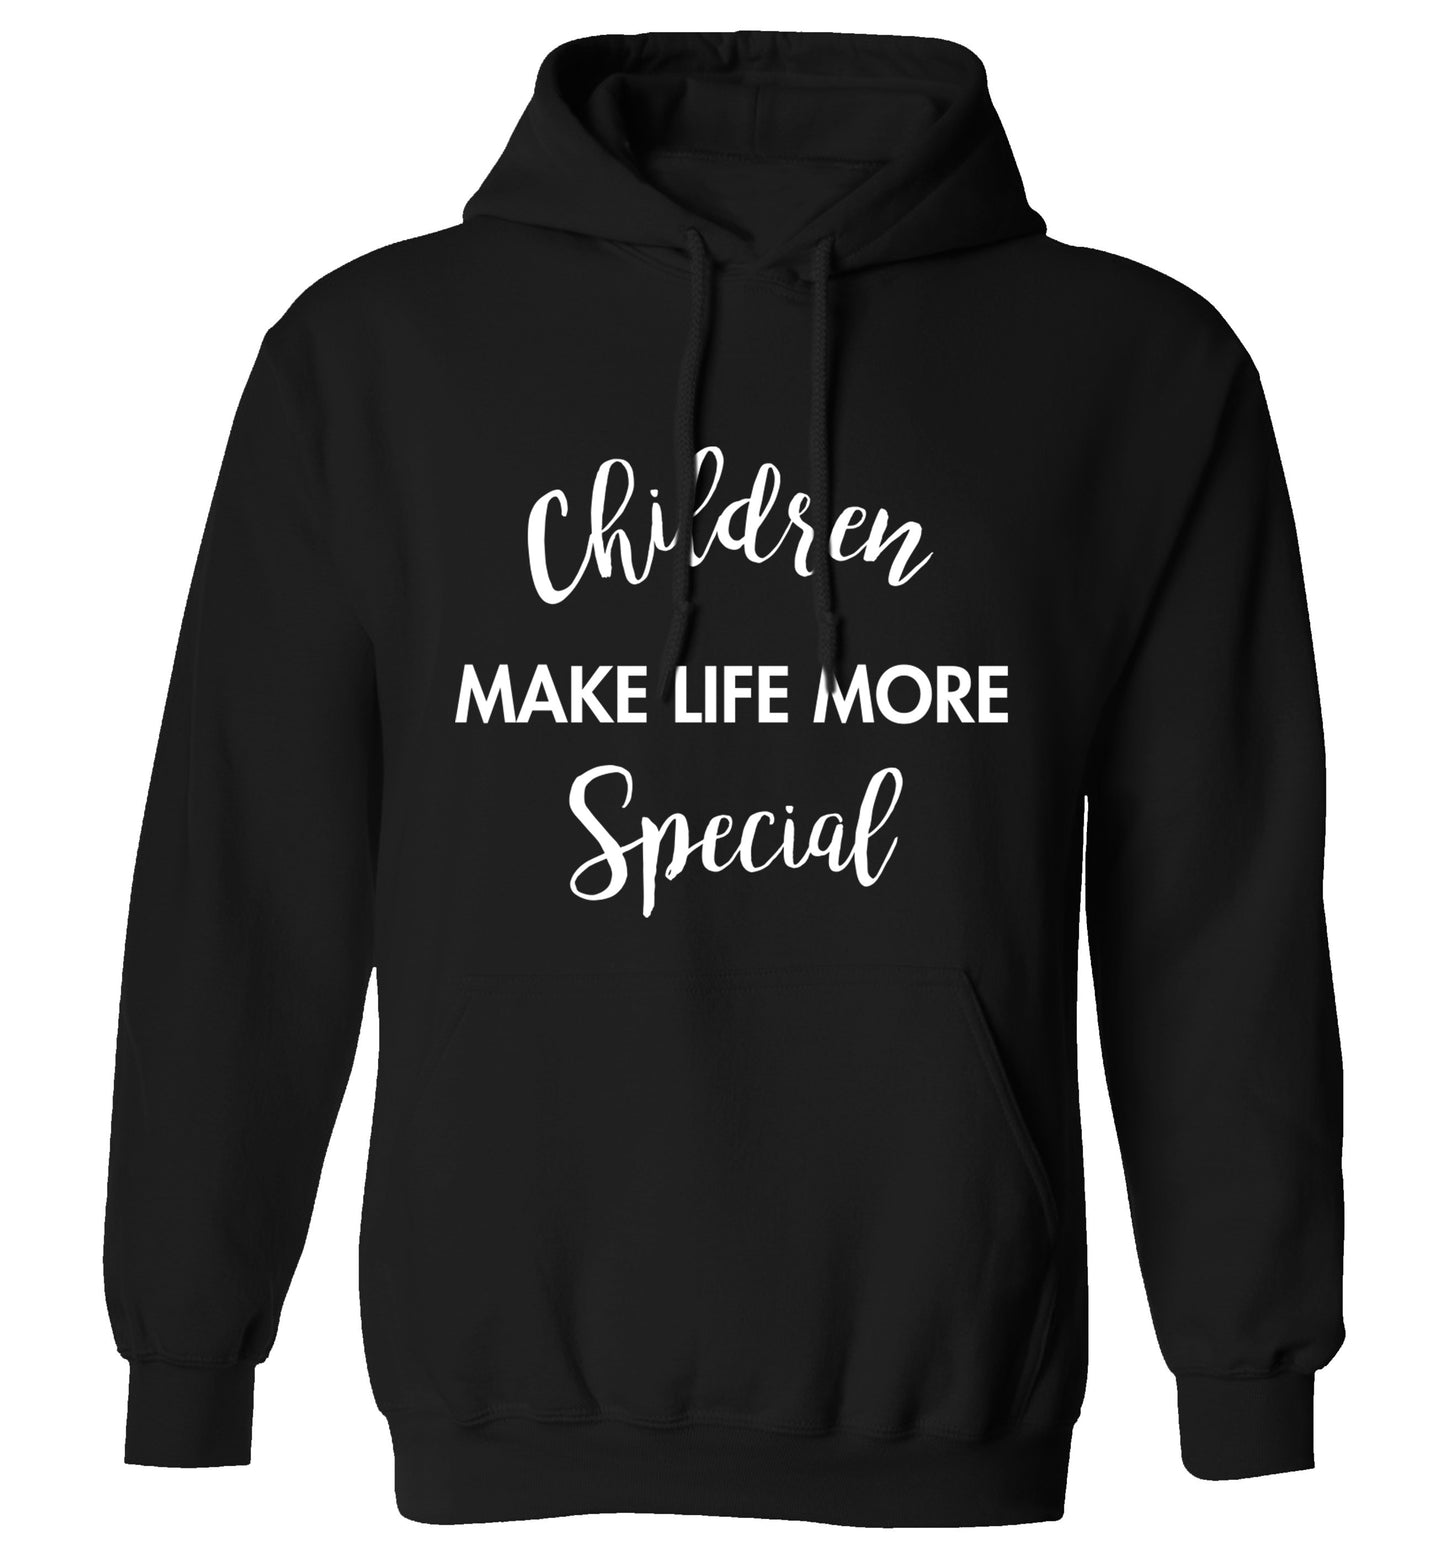 Children make life more special adults unisex black hoodie 2XL